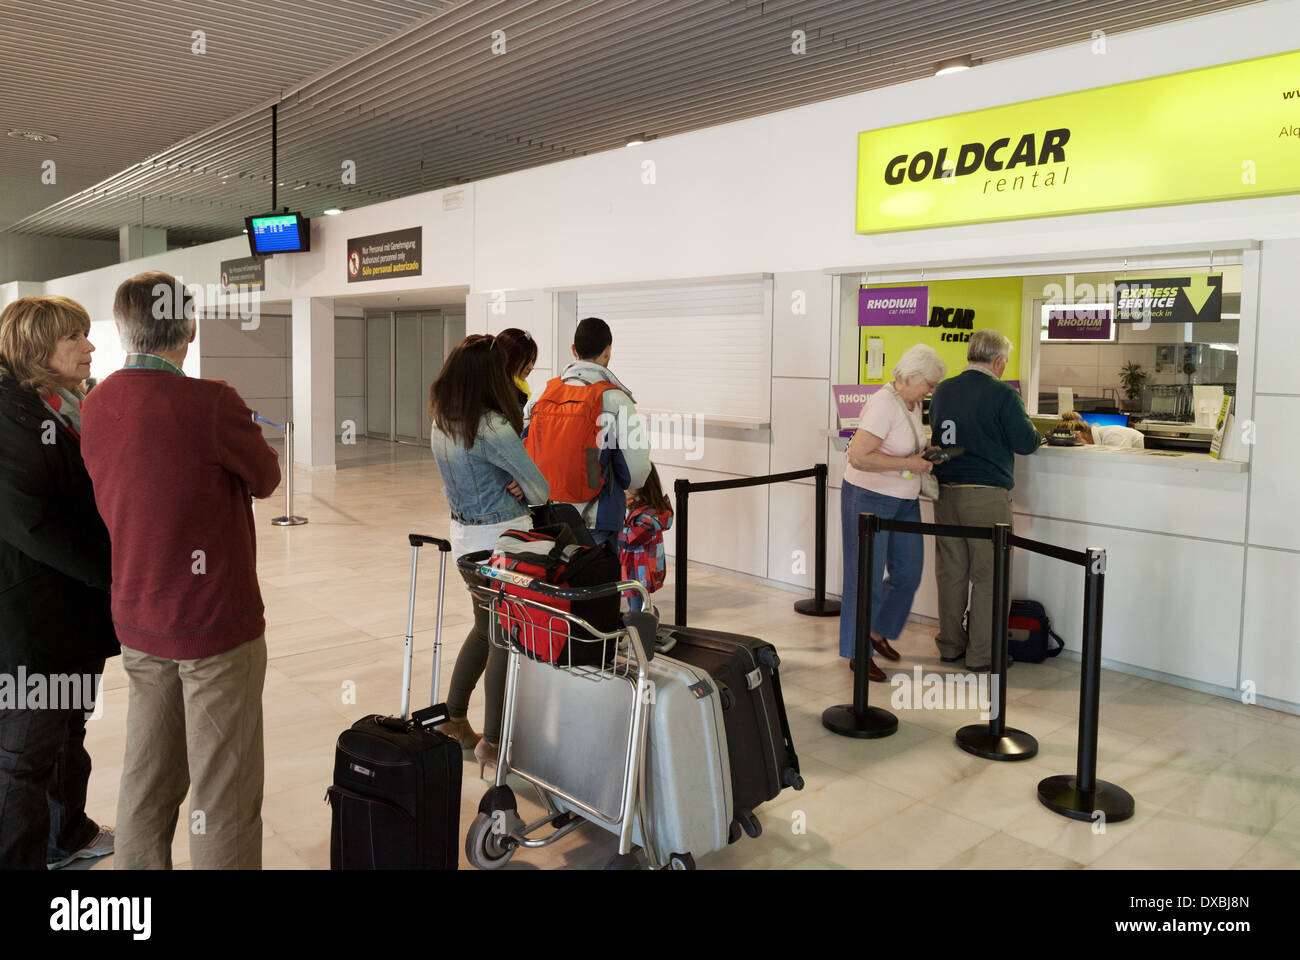 People waiting in a queue at the Goldcar rental hire car desk counter, Almeria airport, Spain Europe Stock Photo